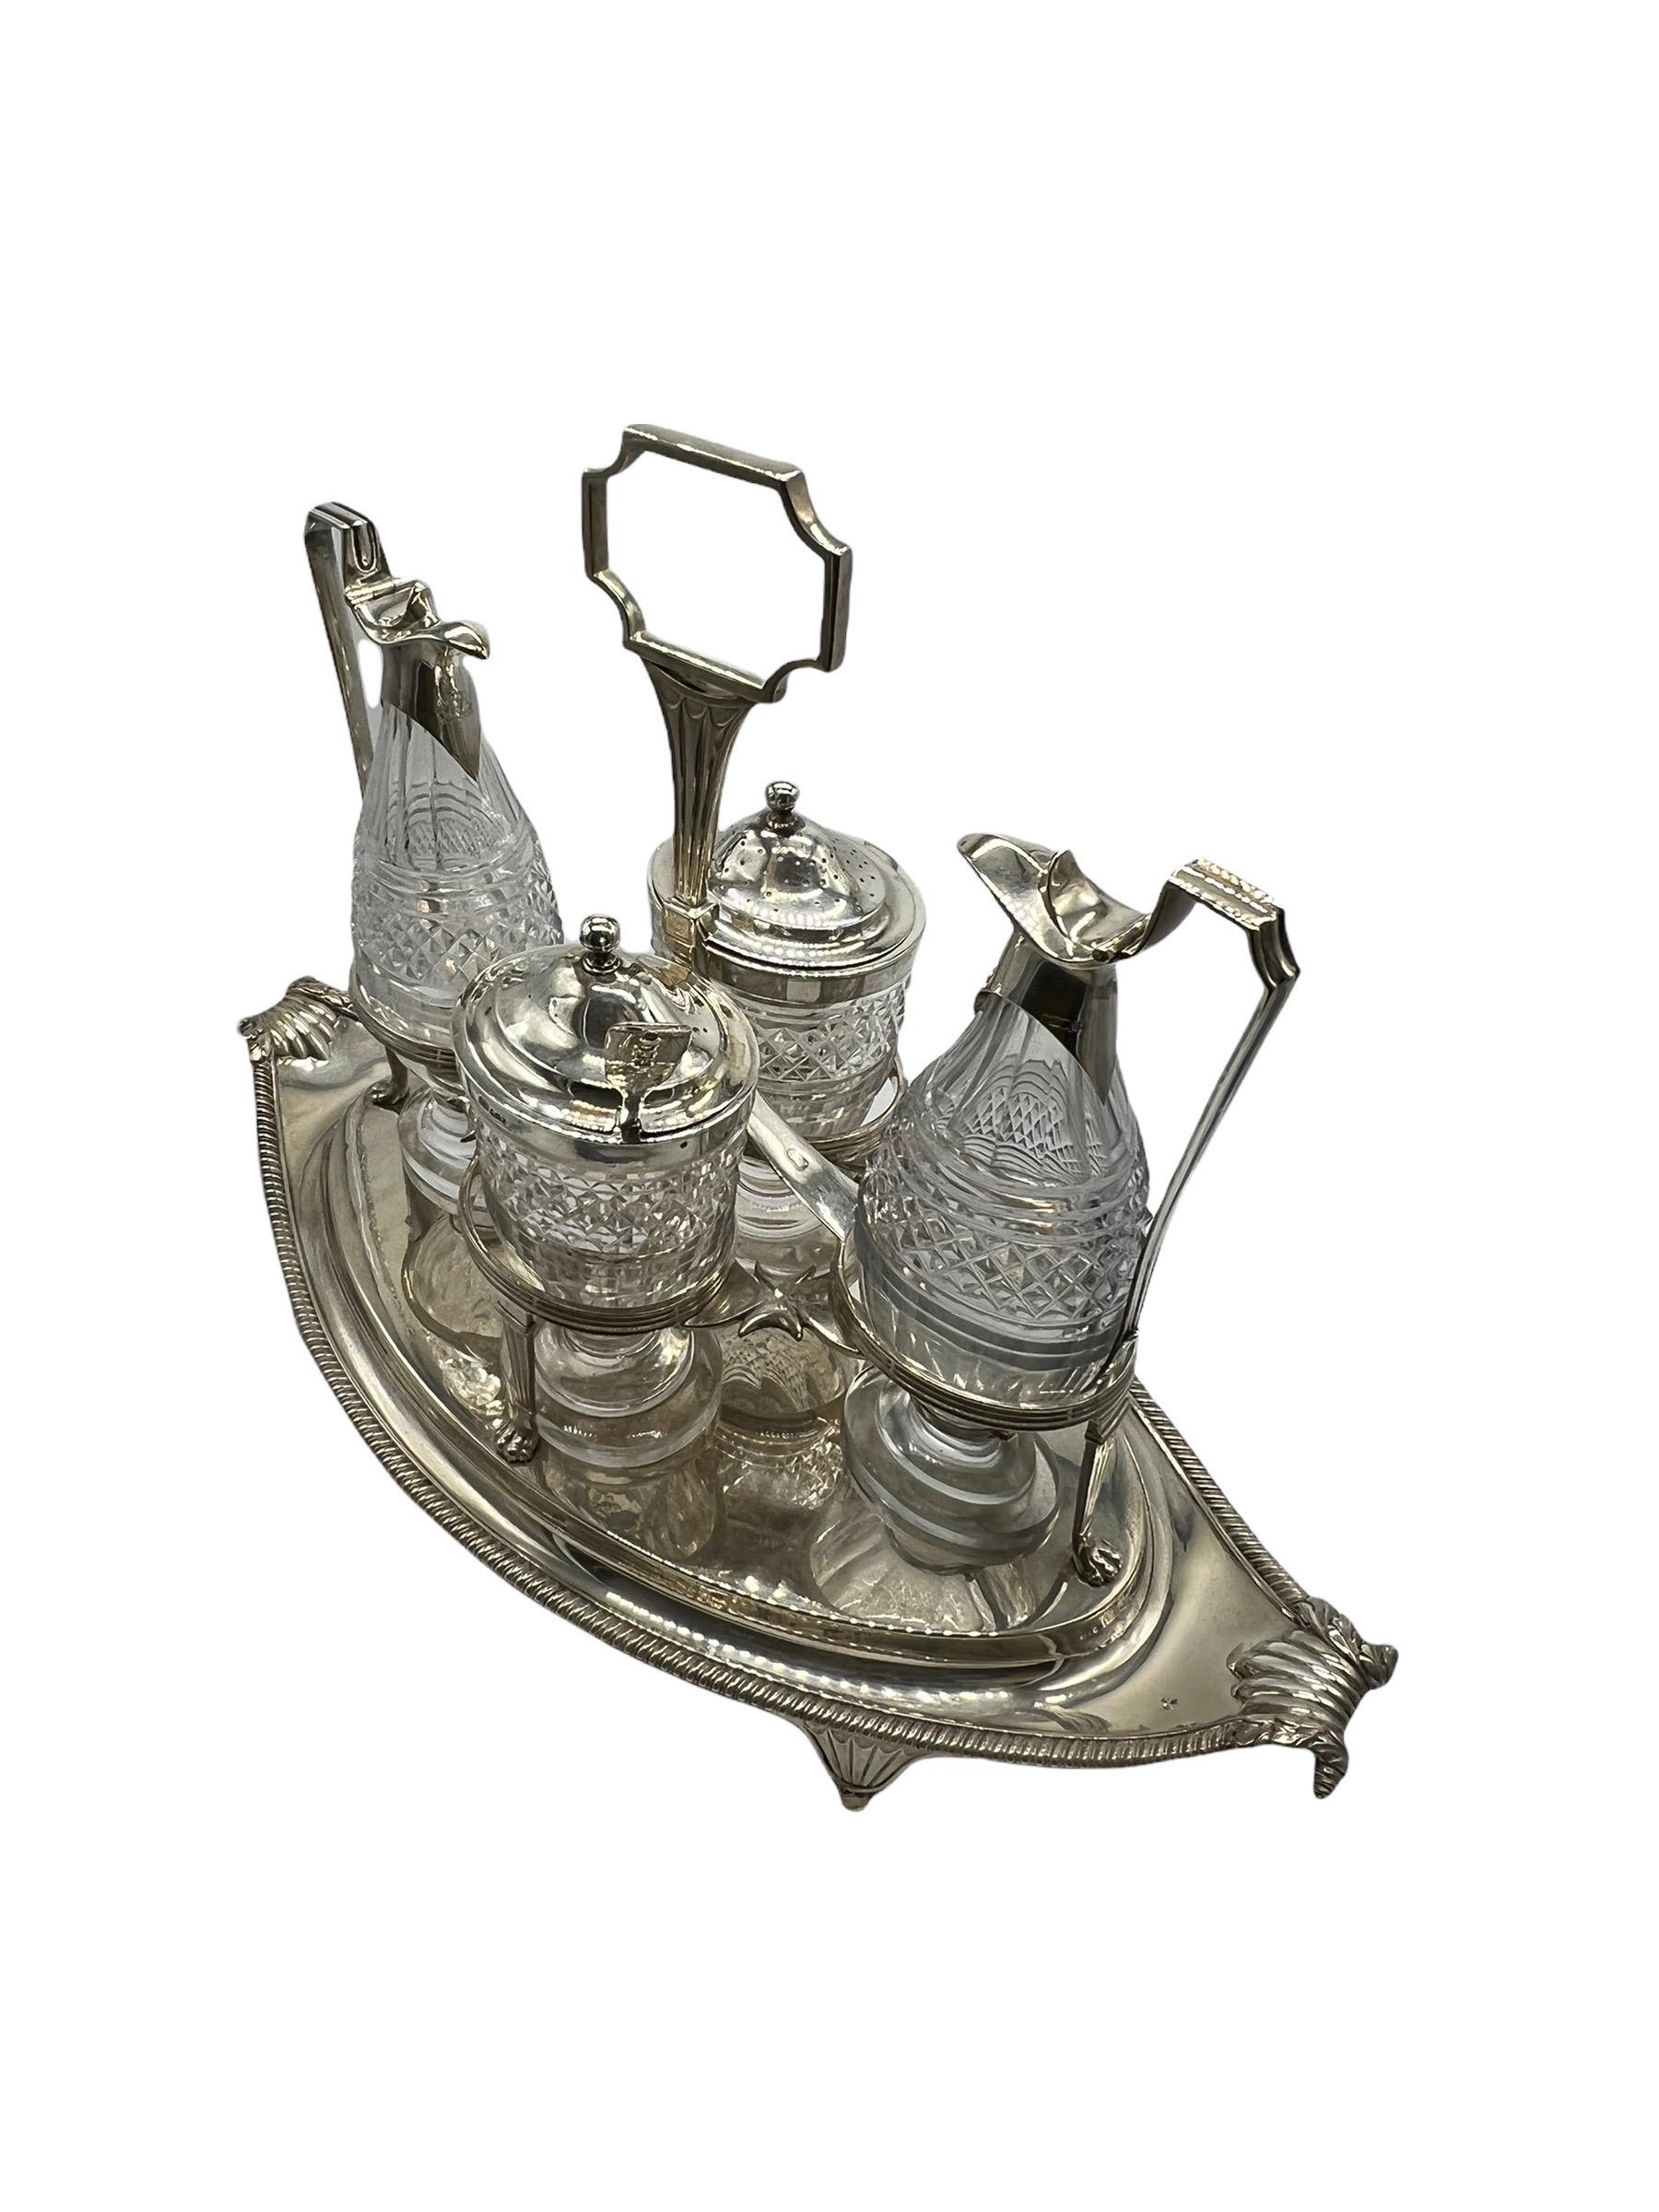 Sterling silver and cut-glass cruet set by Paul Storr. A pair of cruets and two footed condiment jars, crafted of finely cut glass mounted in silver, are held securely on a distinctive handled tray adorned with an intricate egg-and-dart trim,